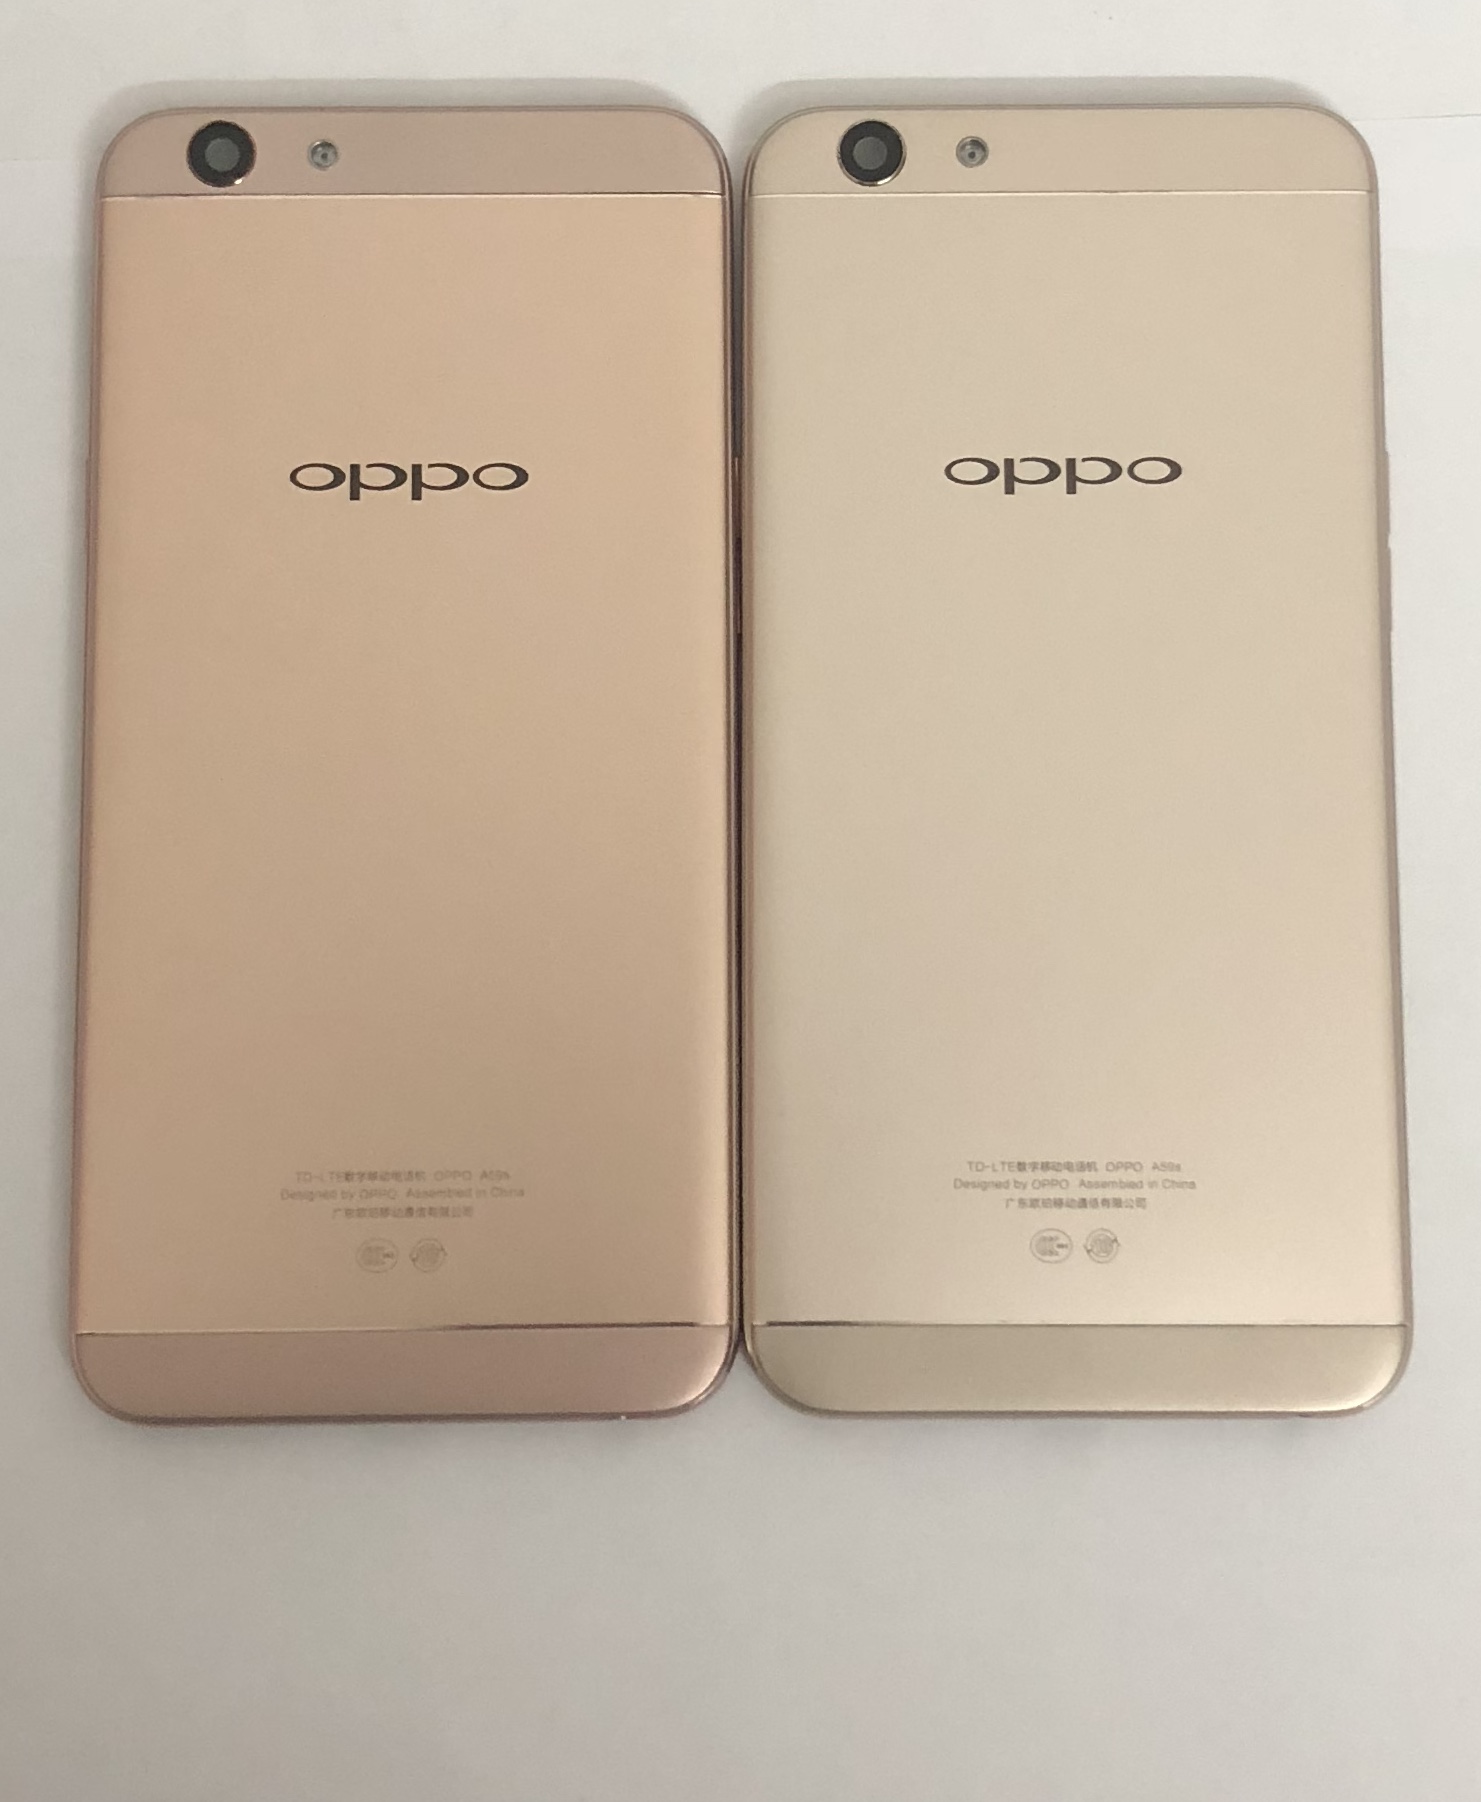 Oppo A59 Price Reviews, Specifications